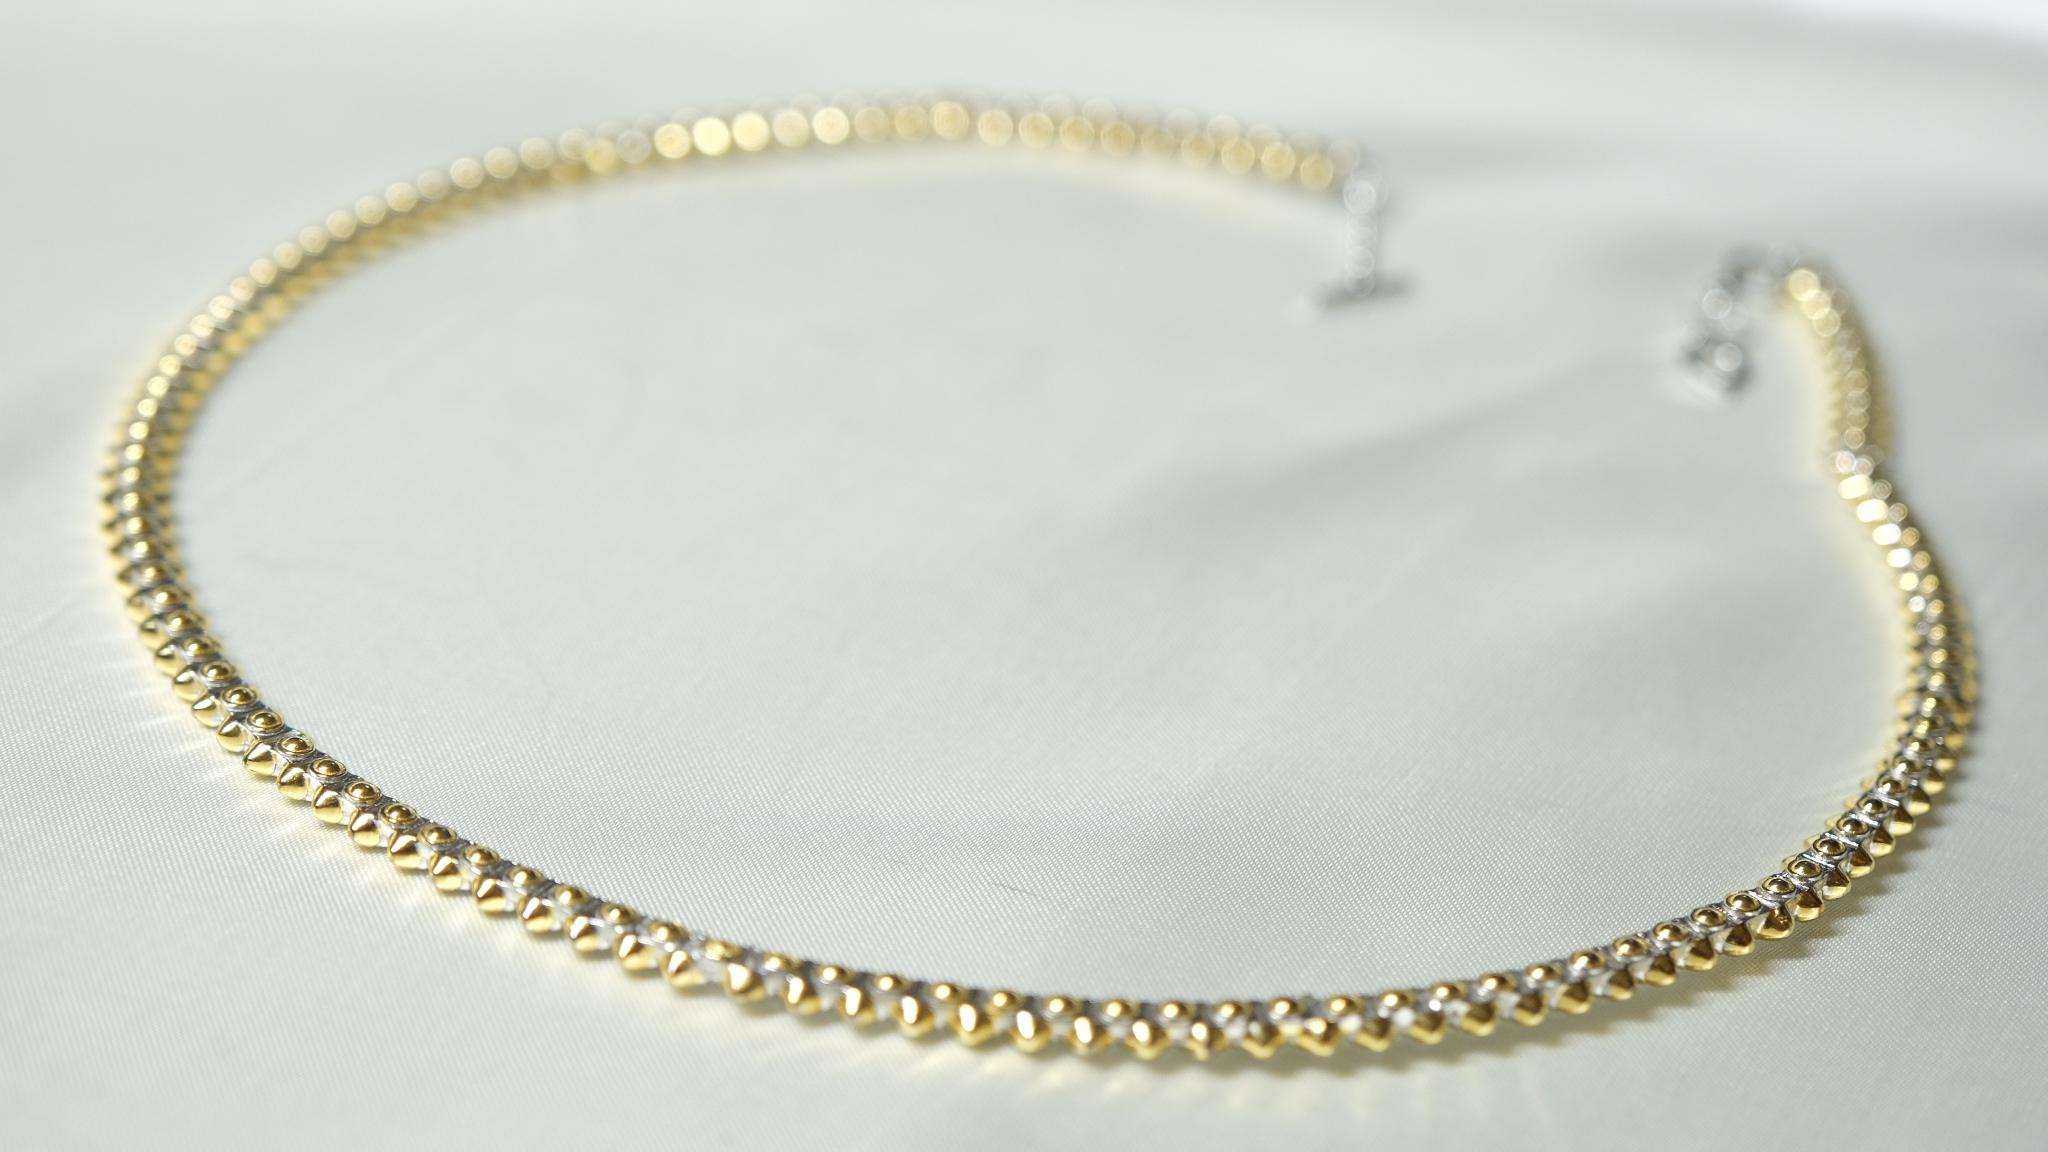 Serendipity Necklace, 18k Yellow Gold/White Gold For Sale 3